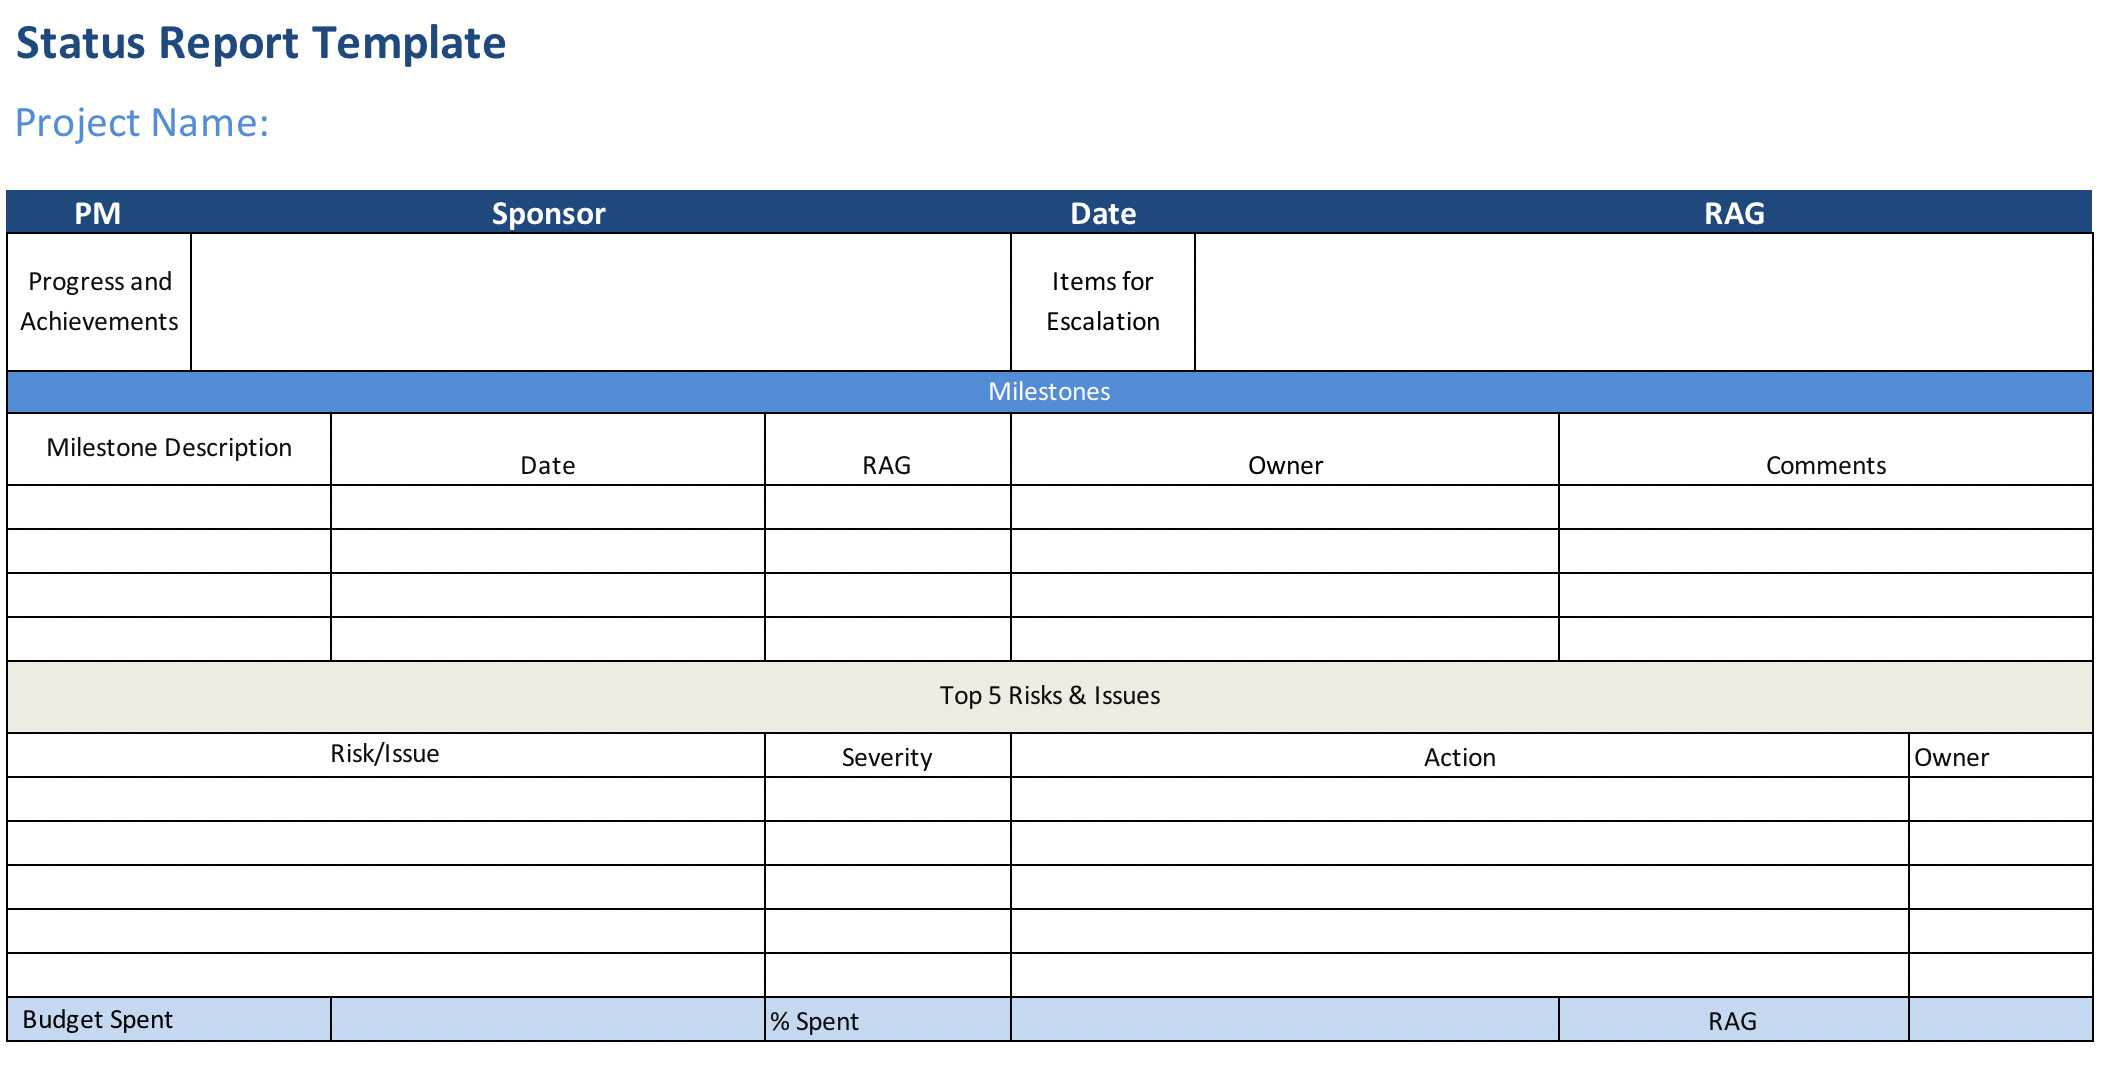 Project Status Report (Free Excel Template) – Projectmanager Throughout Project Status Report Email Template